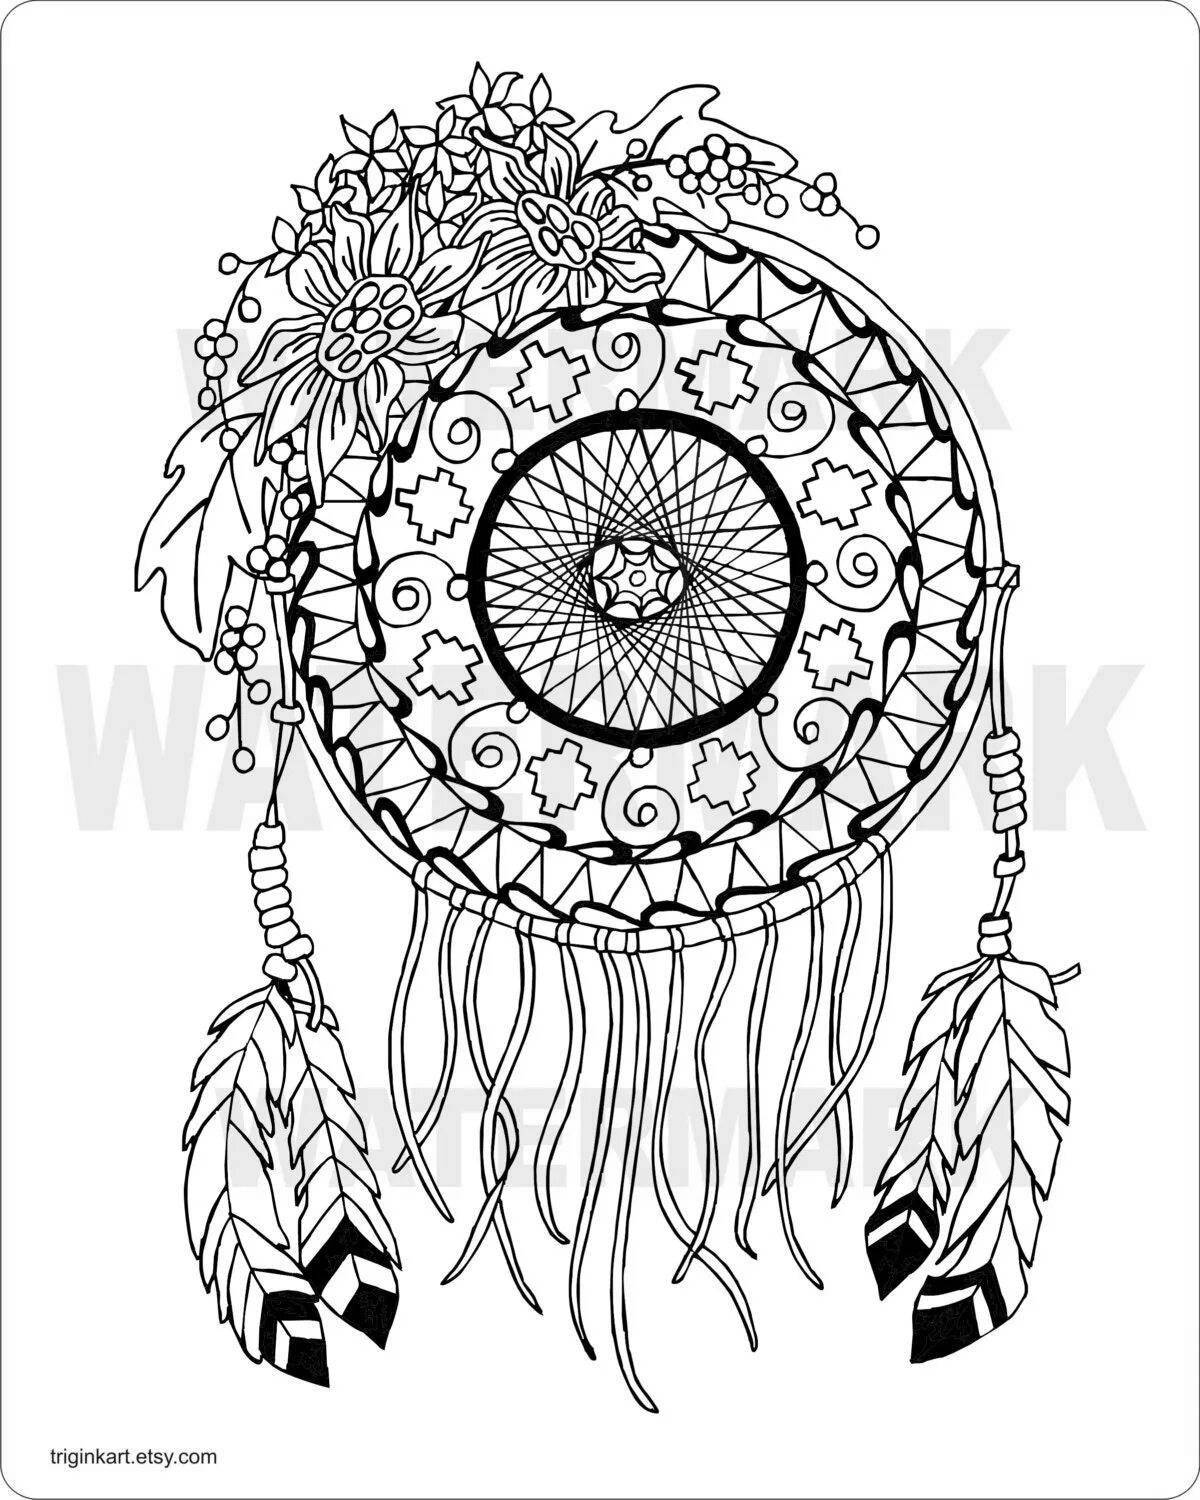 Shining coloring book antistress dream catcher